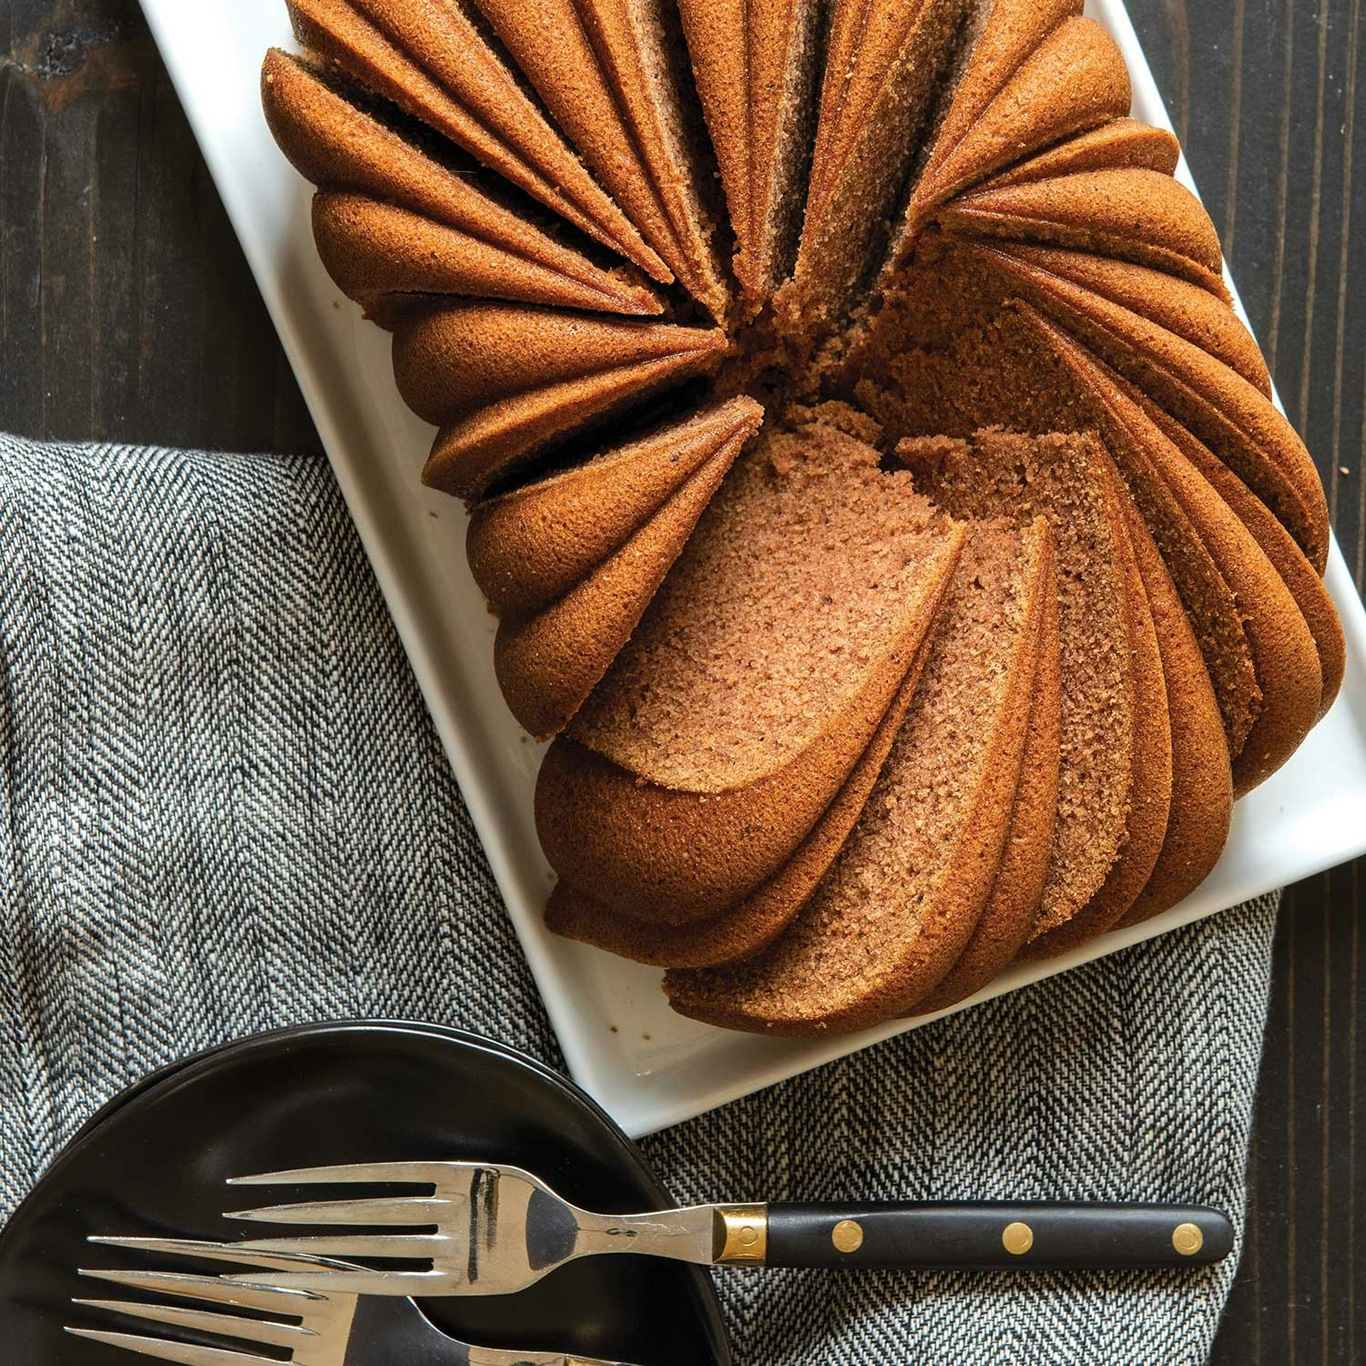 https://royaldesign.com/image/2/nordic-ware-classic-fluted-loaf-pan-1?w=800&quality=80